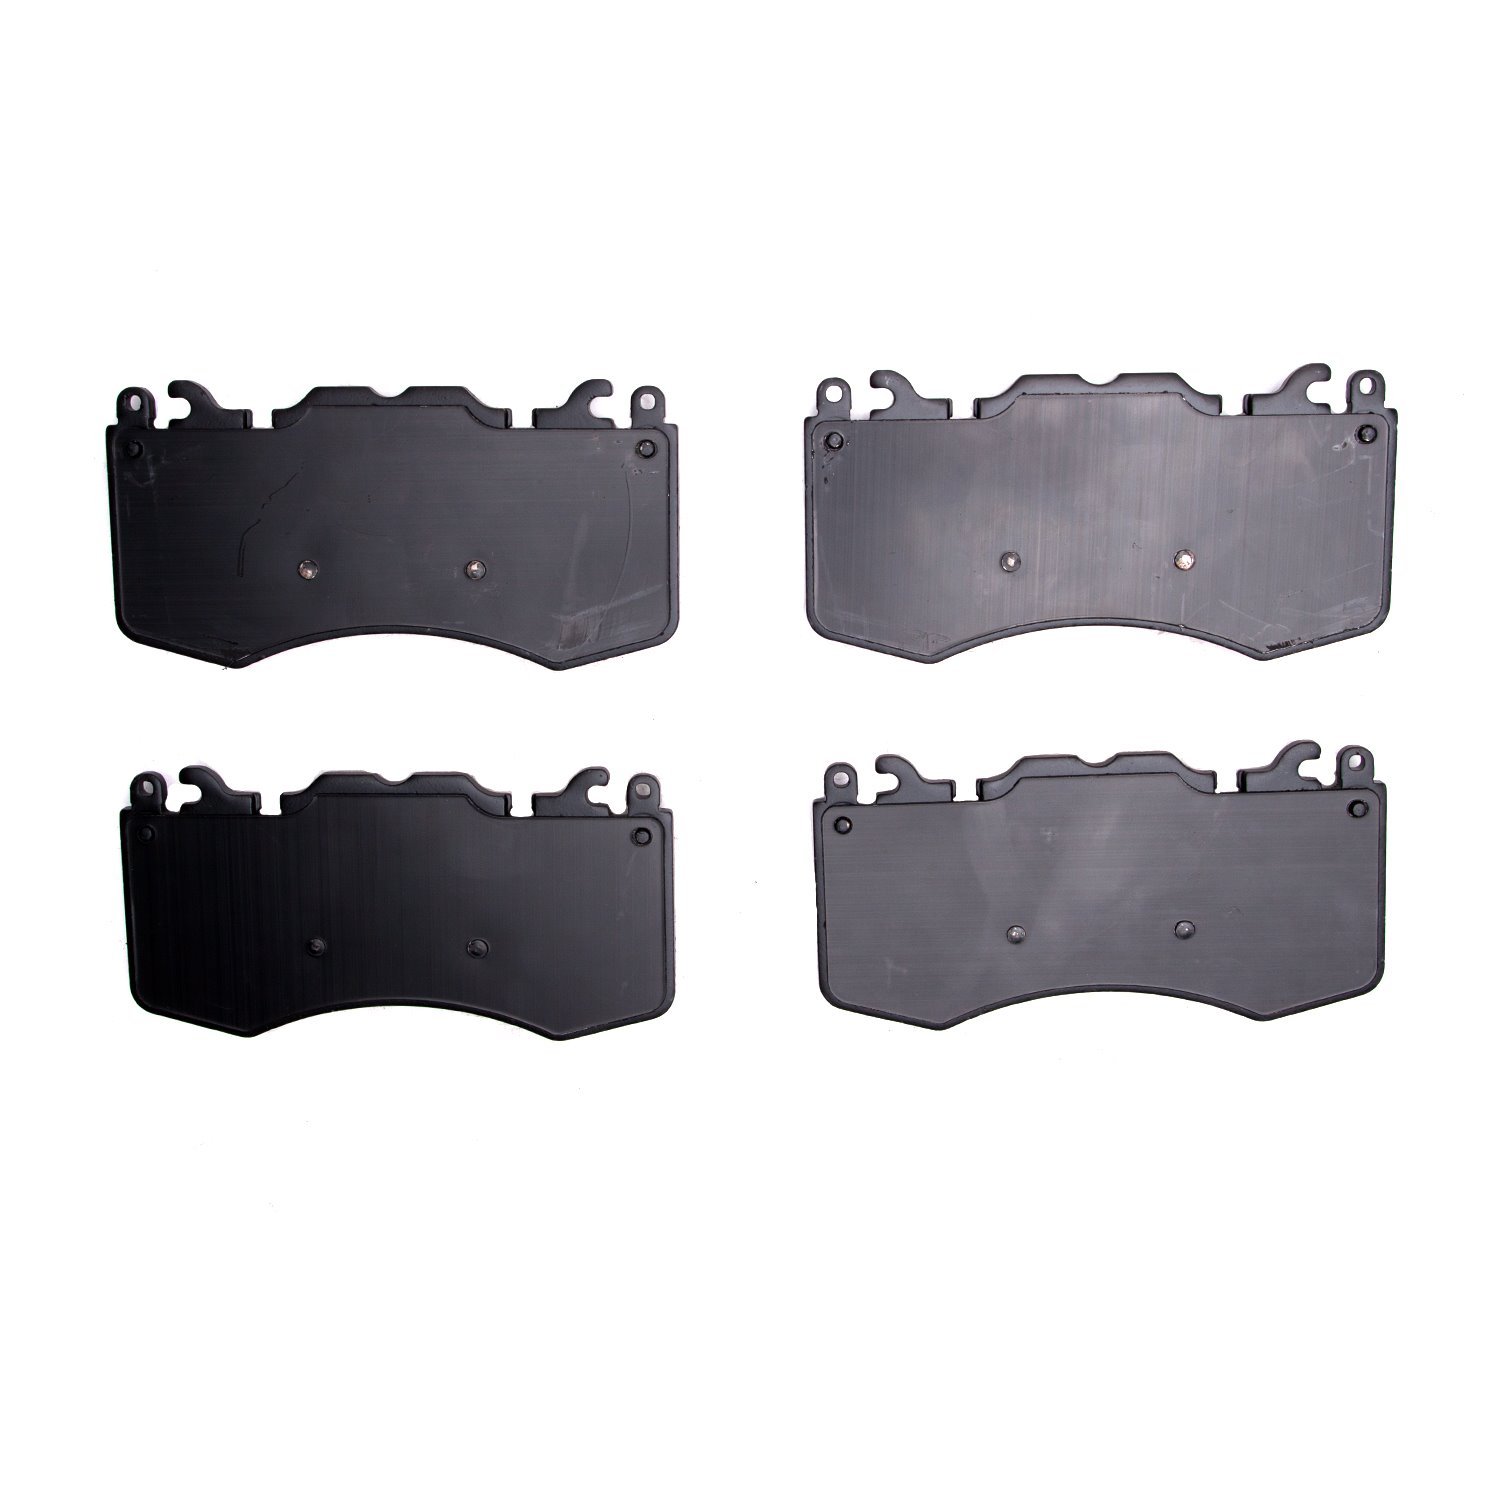 1000-1426-00 Track/Street Low-Metallic Brake Pads Kit, Fits Select Land Rover, Position: Front